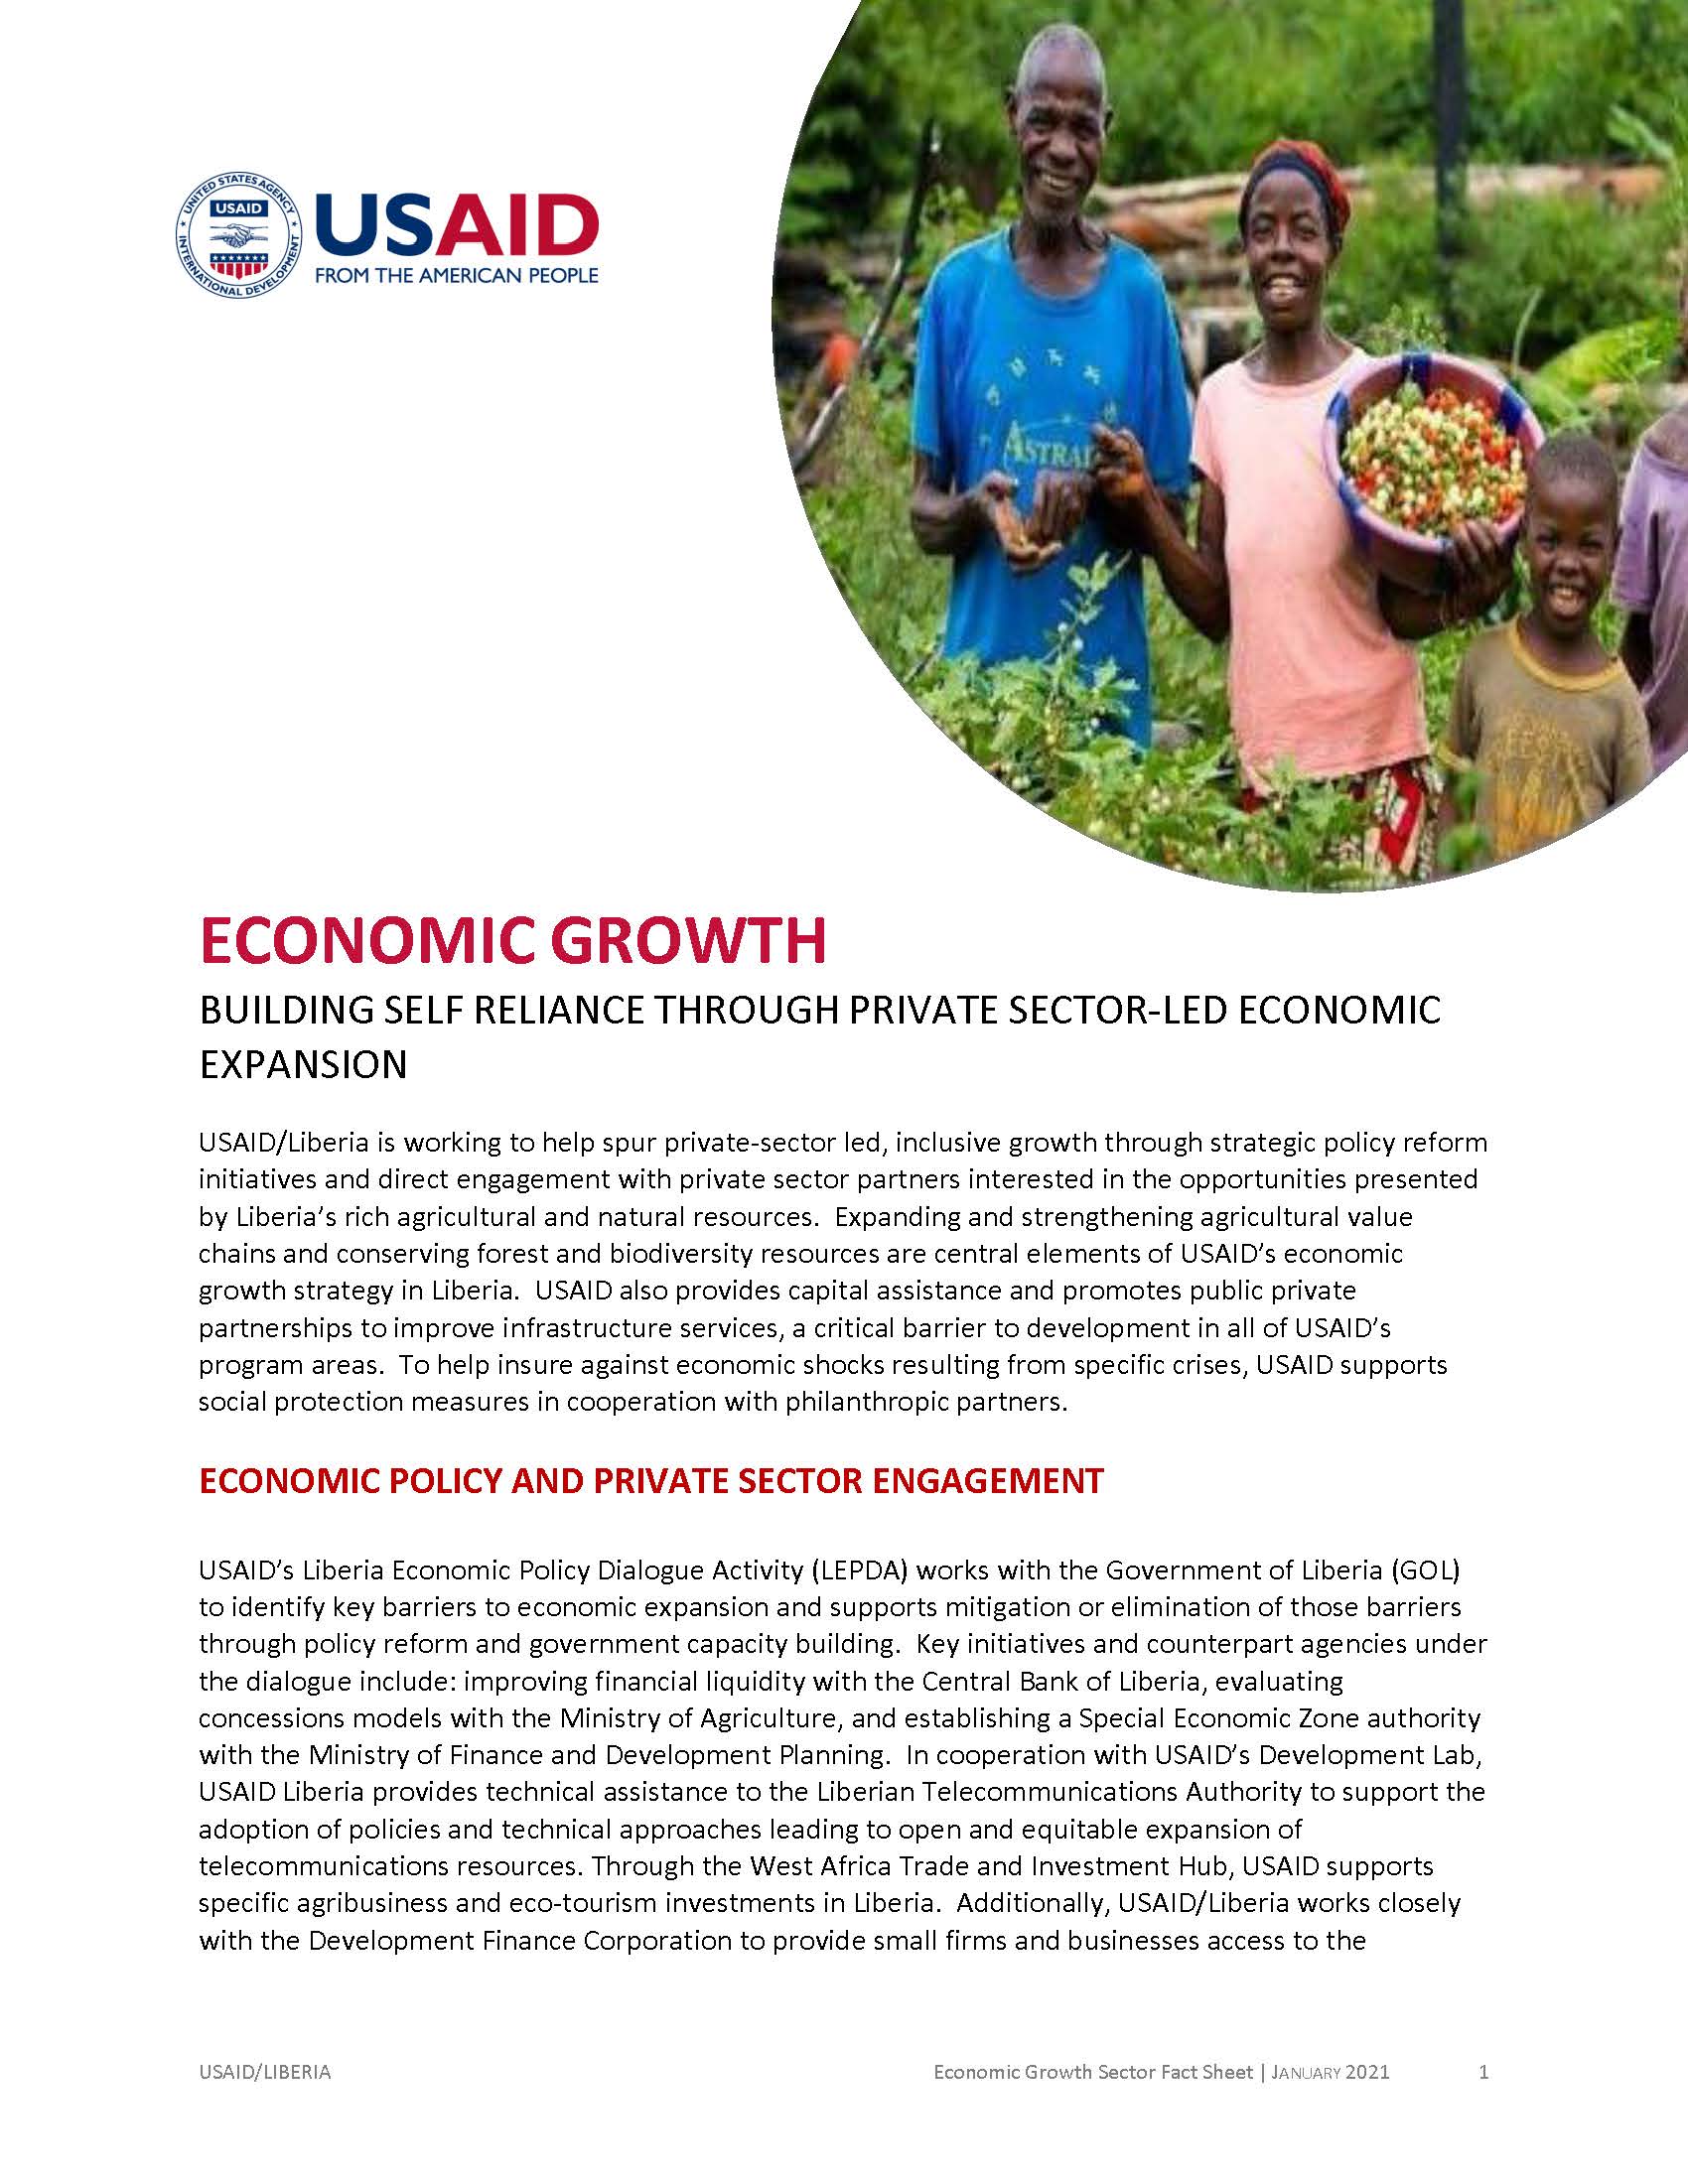 Economic Growth Sector Fact Sheet